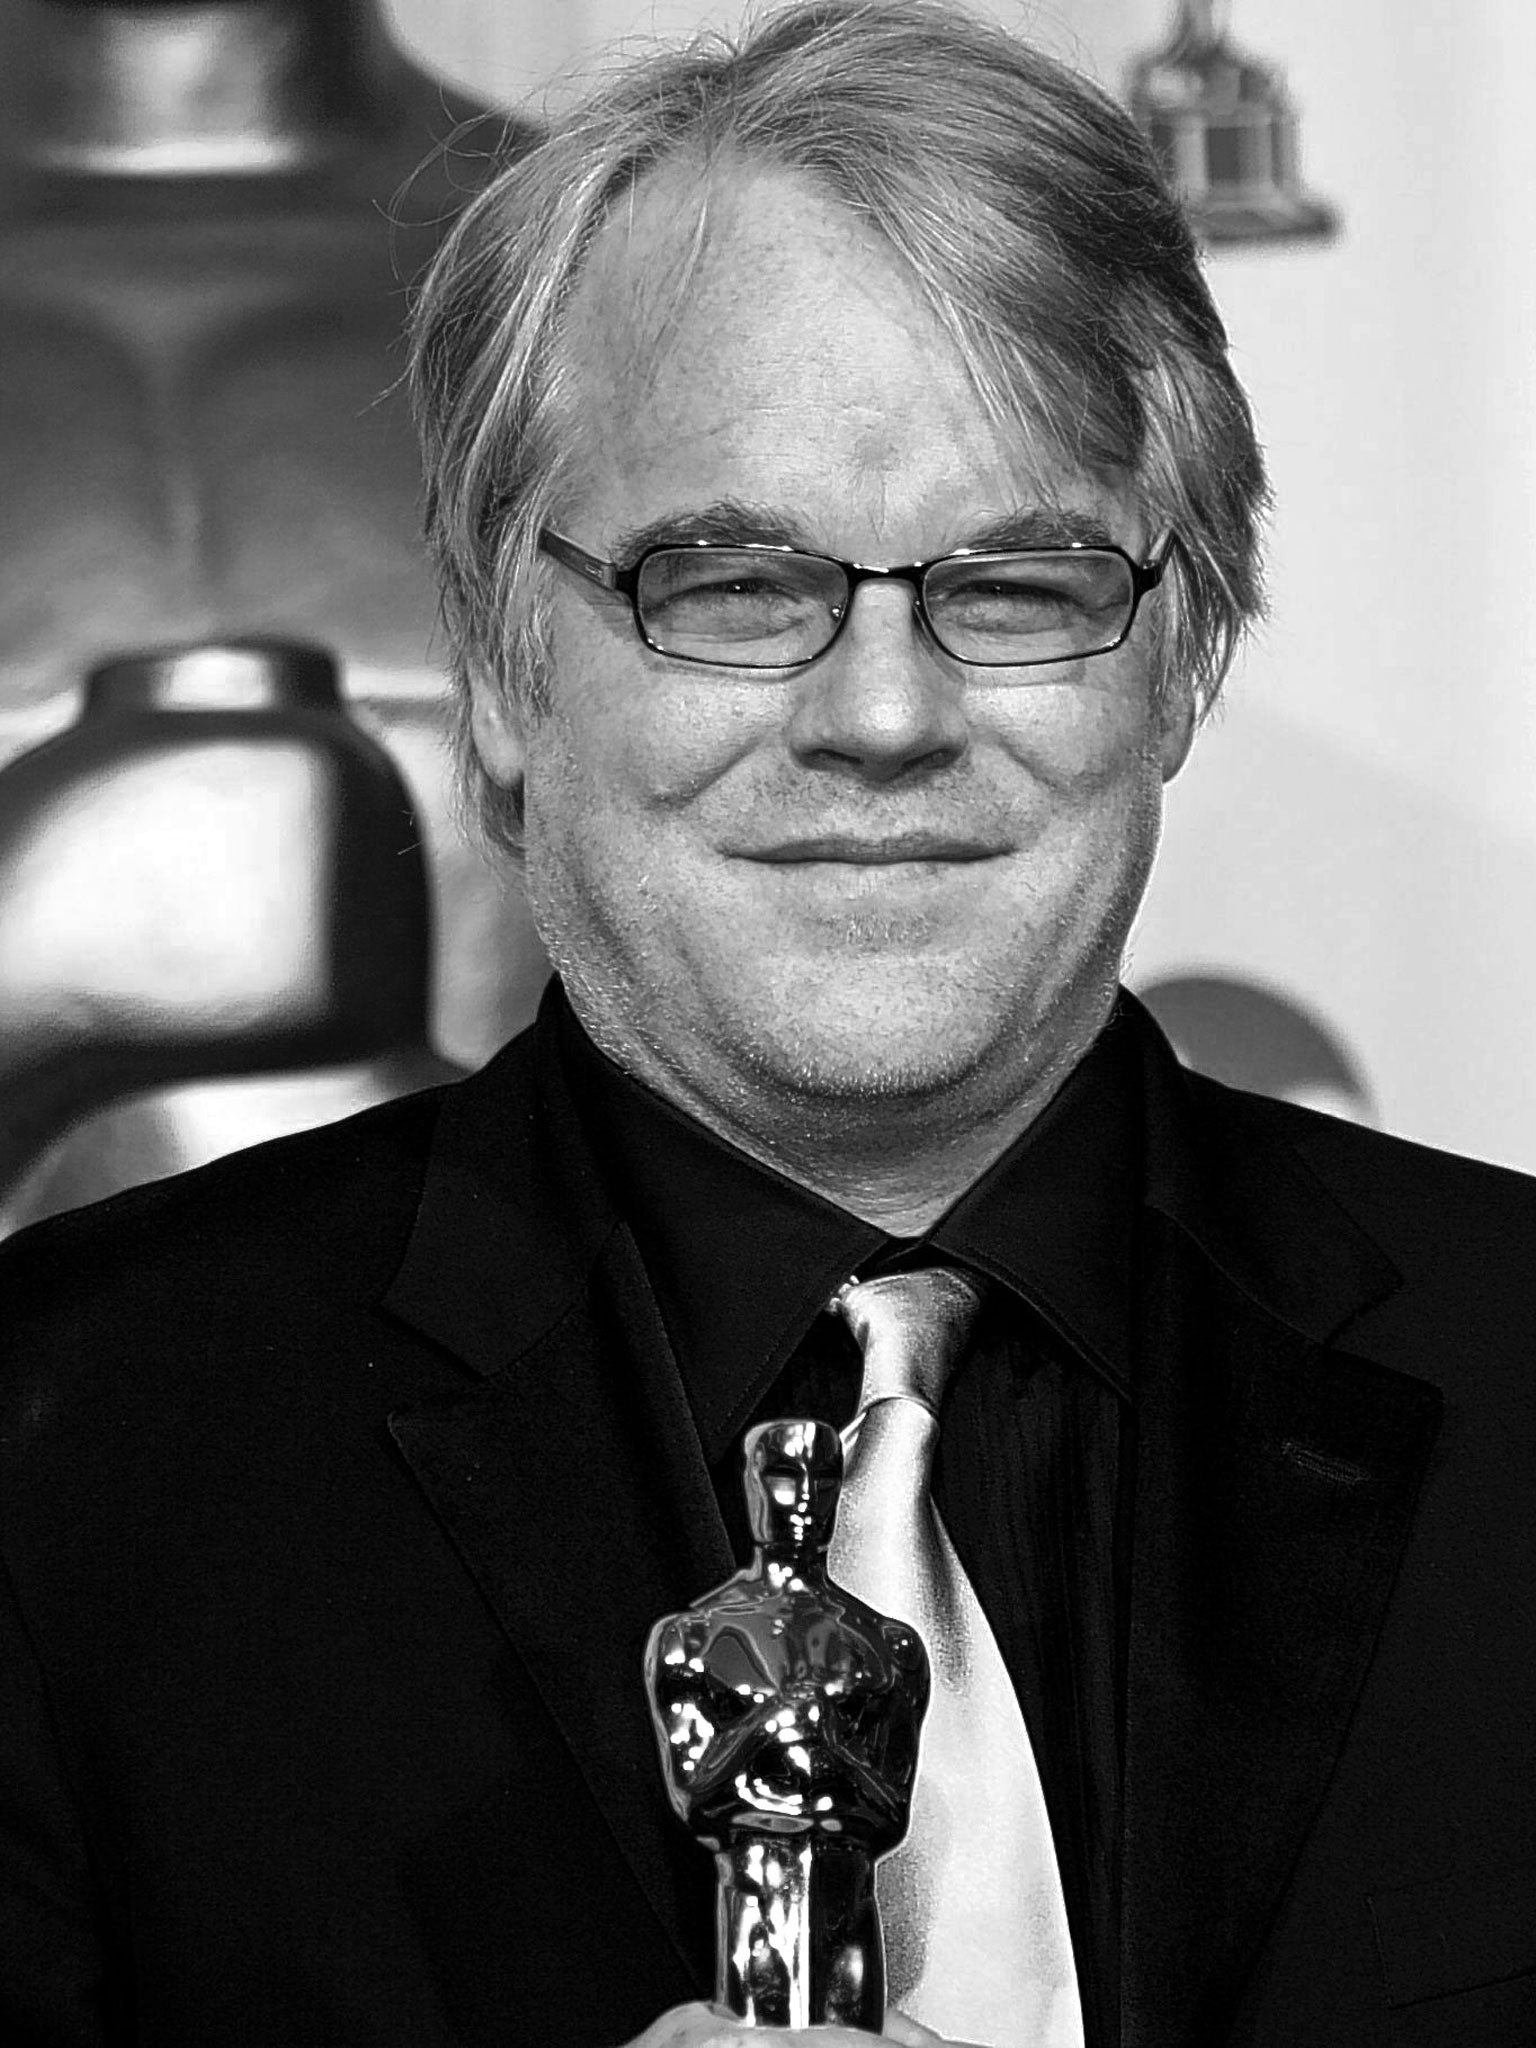 Philip Seymour Hoffman obituary: Oscar-winner for 'Capote' acclaimed for an indelible succession of haunting, enigmatic performances 